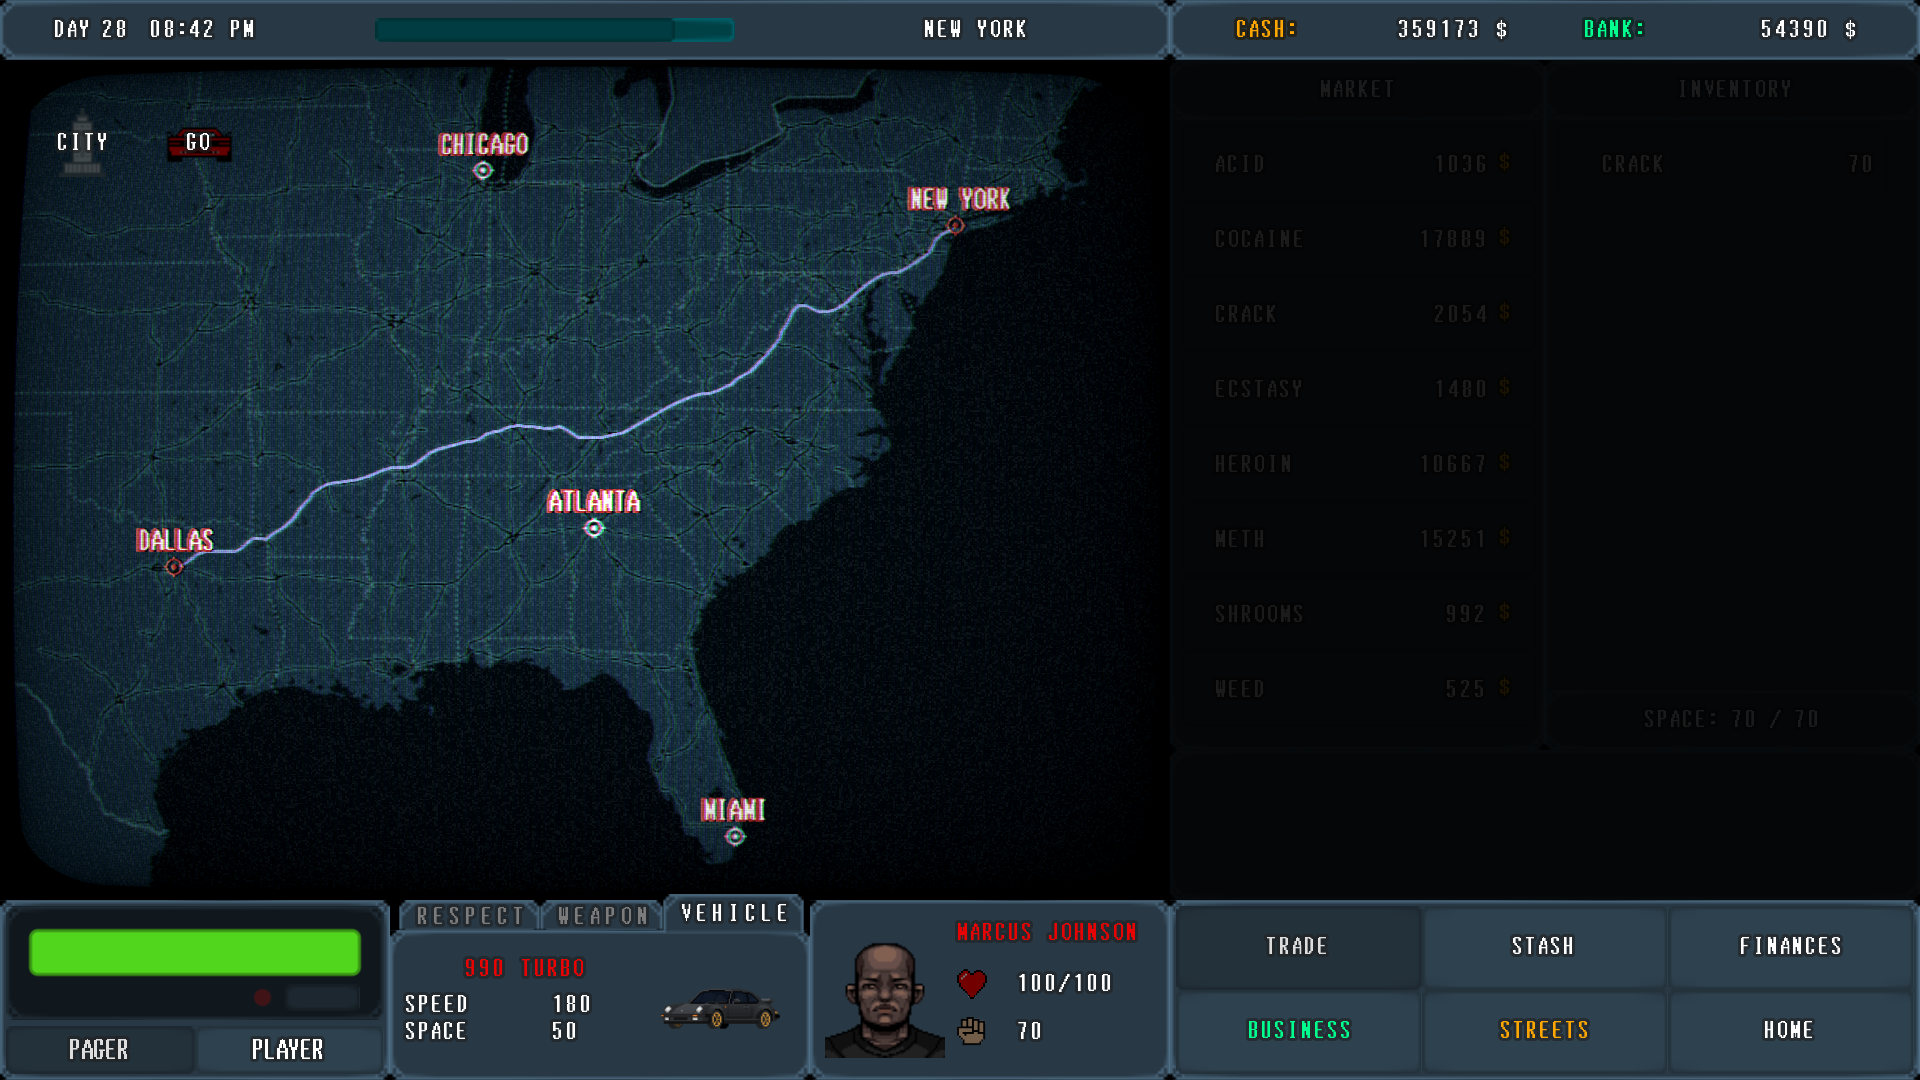 Screenshoot of game PUSHER - DRUG TYCOON showing traveling from New York to Dallas